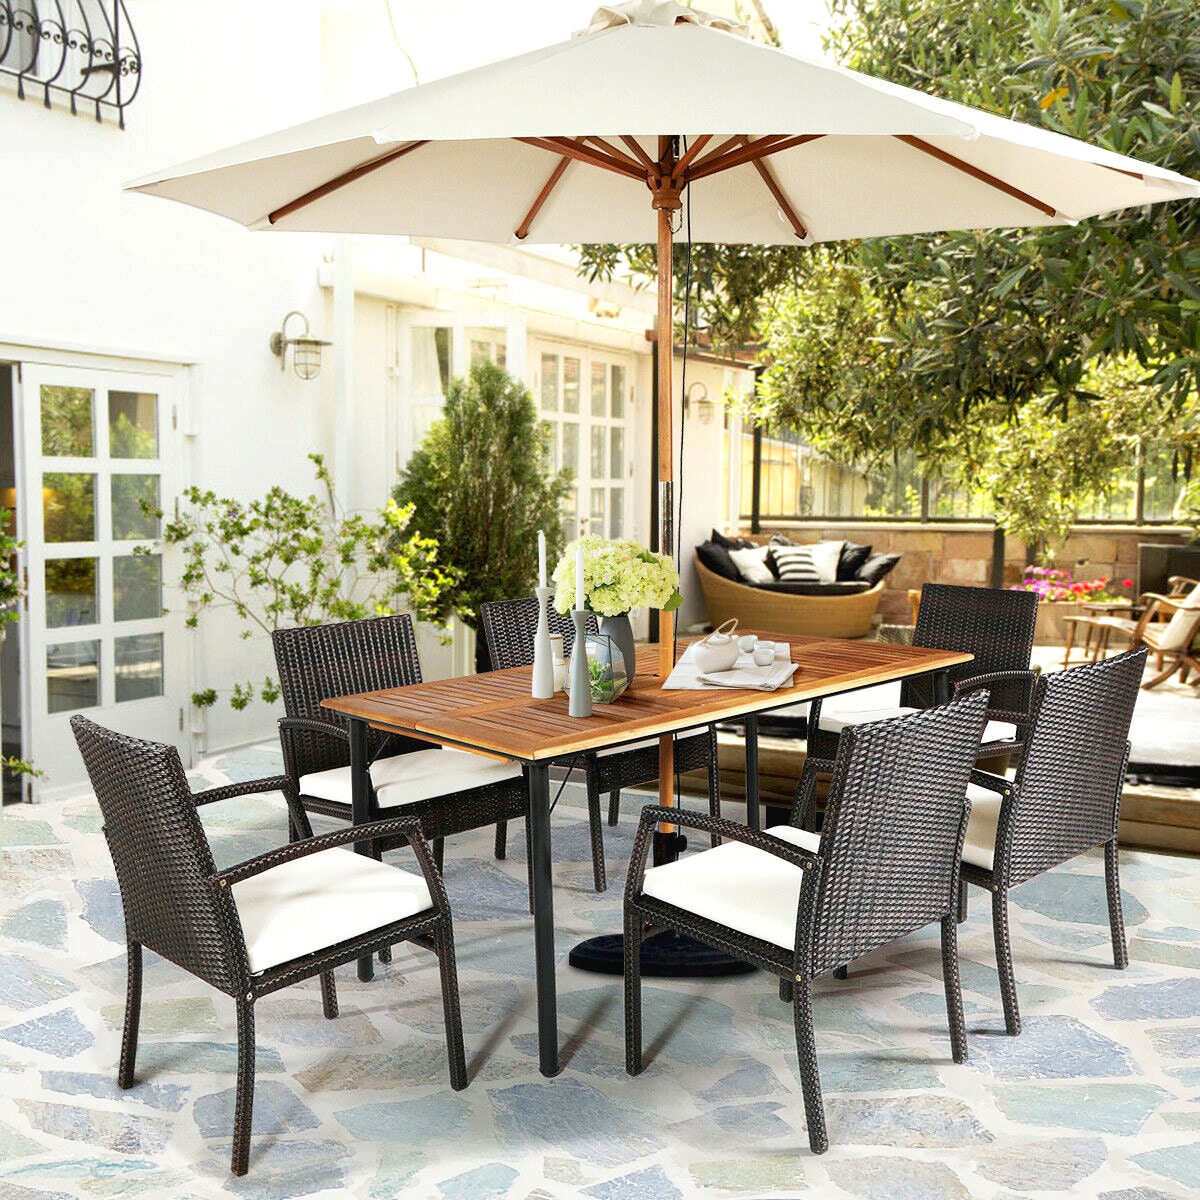 Cushioned Patio Dining Sets at Lowes.com